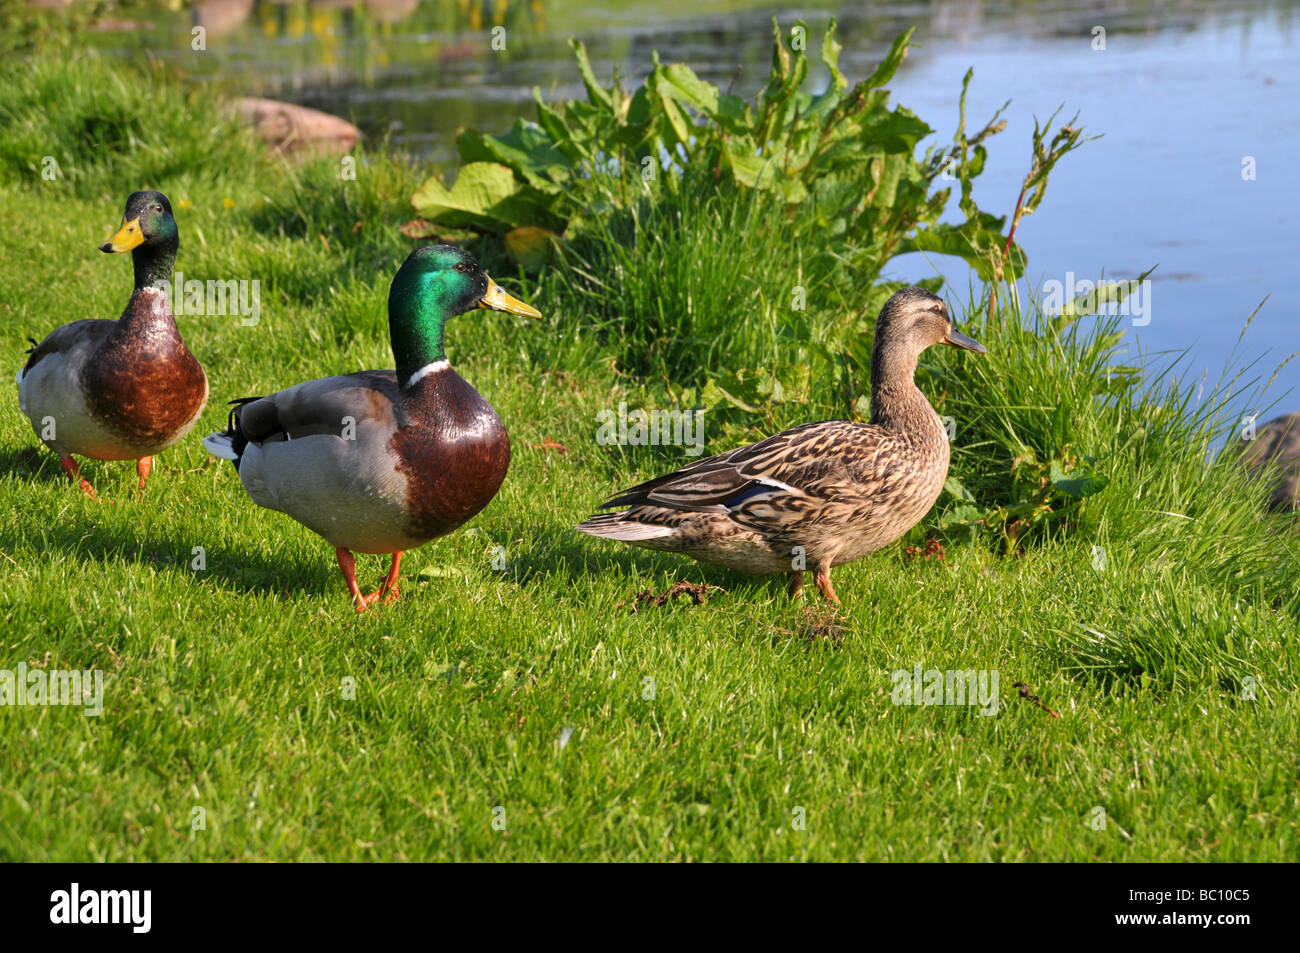 A female and male ducks standing at the edge of a pond. Stock Photo